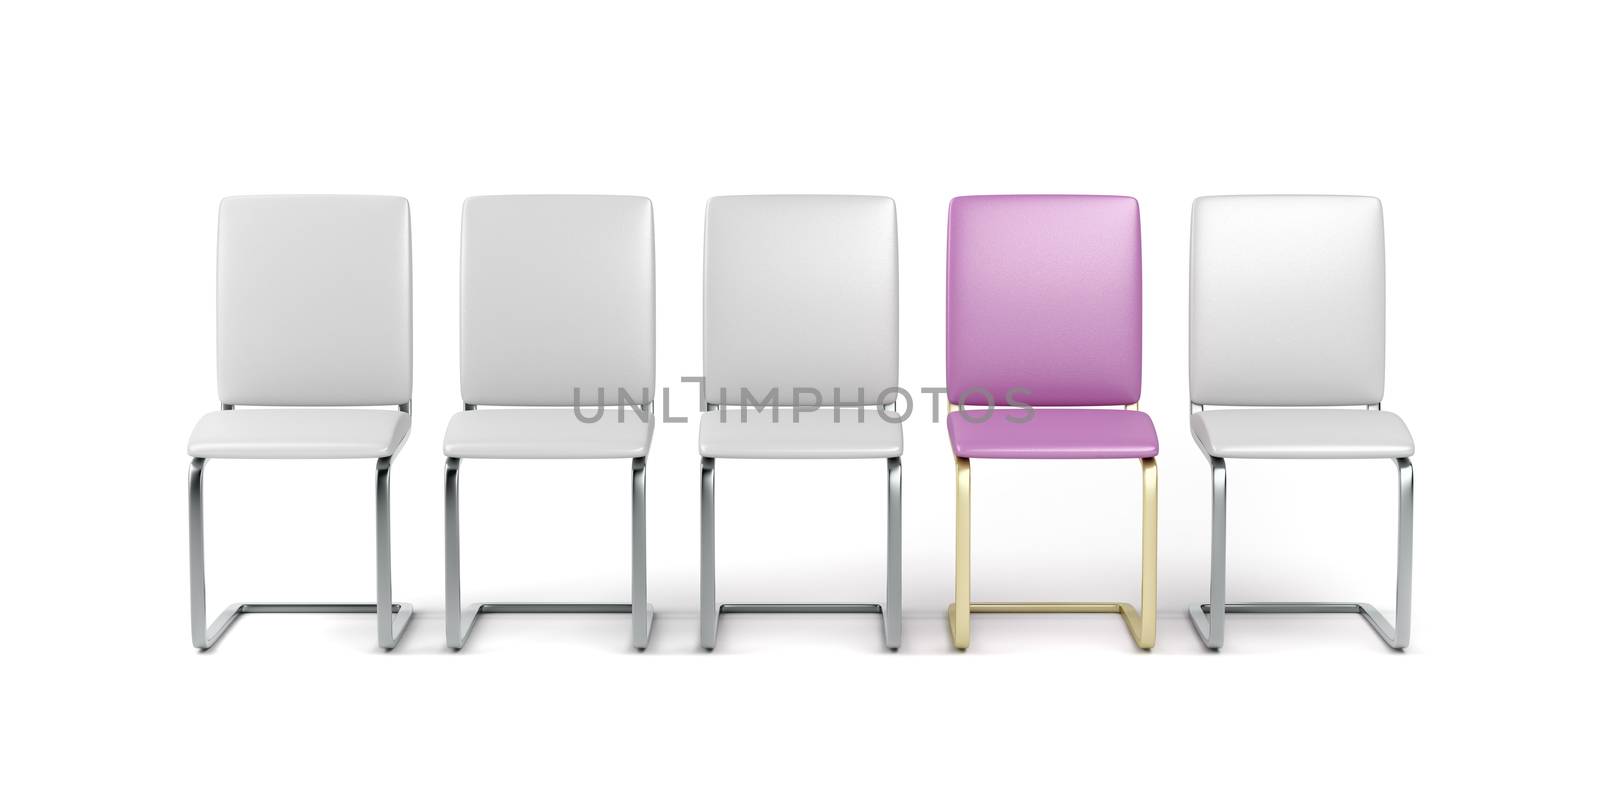 One unique pink and gold colored chair in a row of other chairs, front view